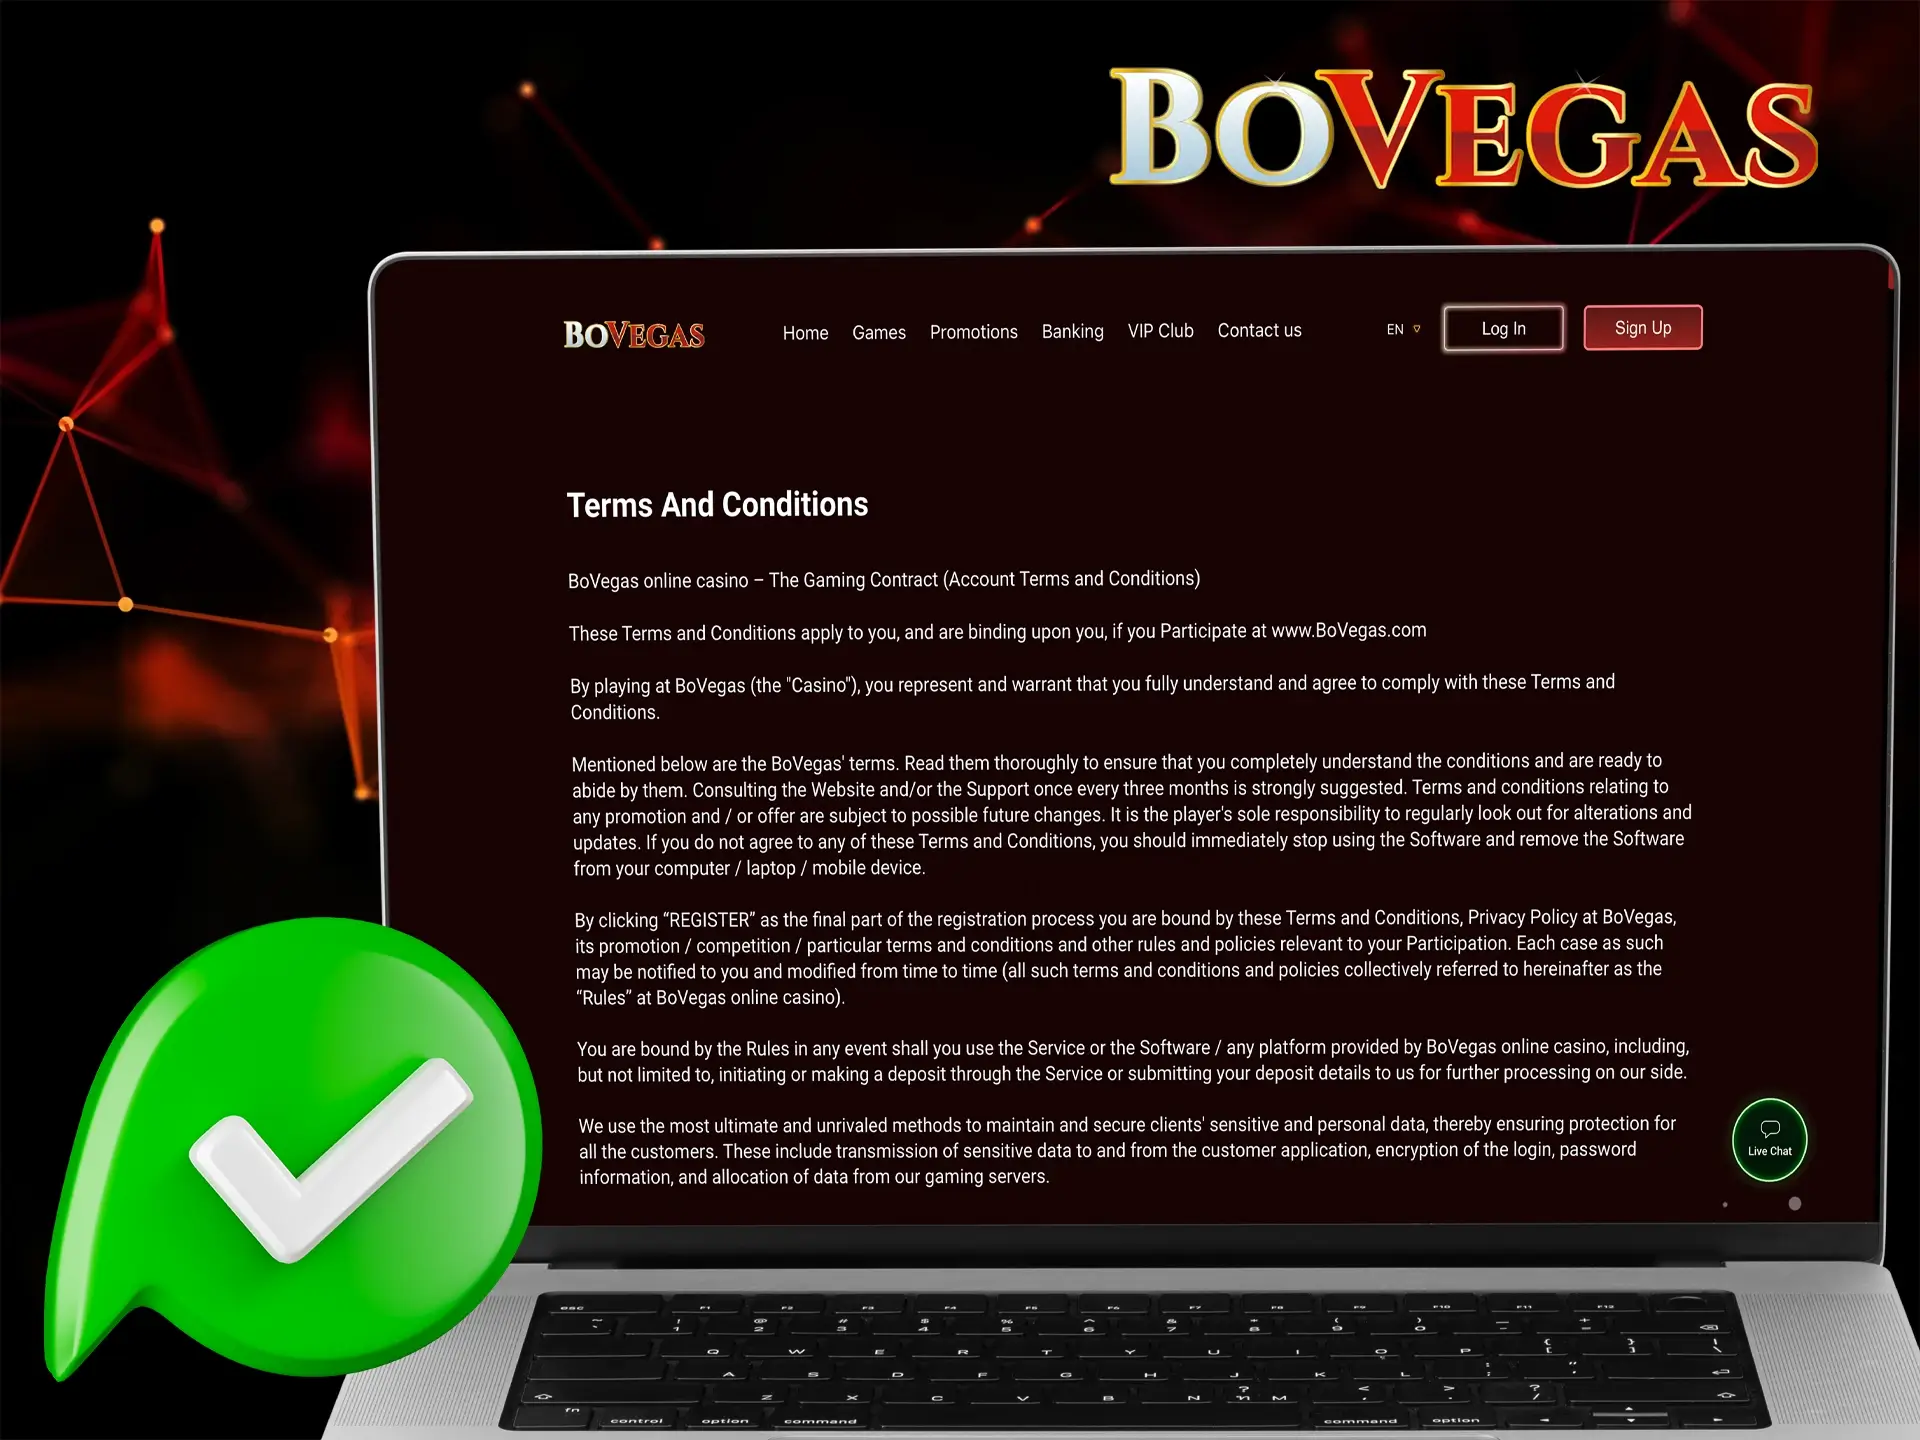 Familiarise yourself with the rules of registration, games, and promotions of BoVegas casino.